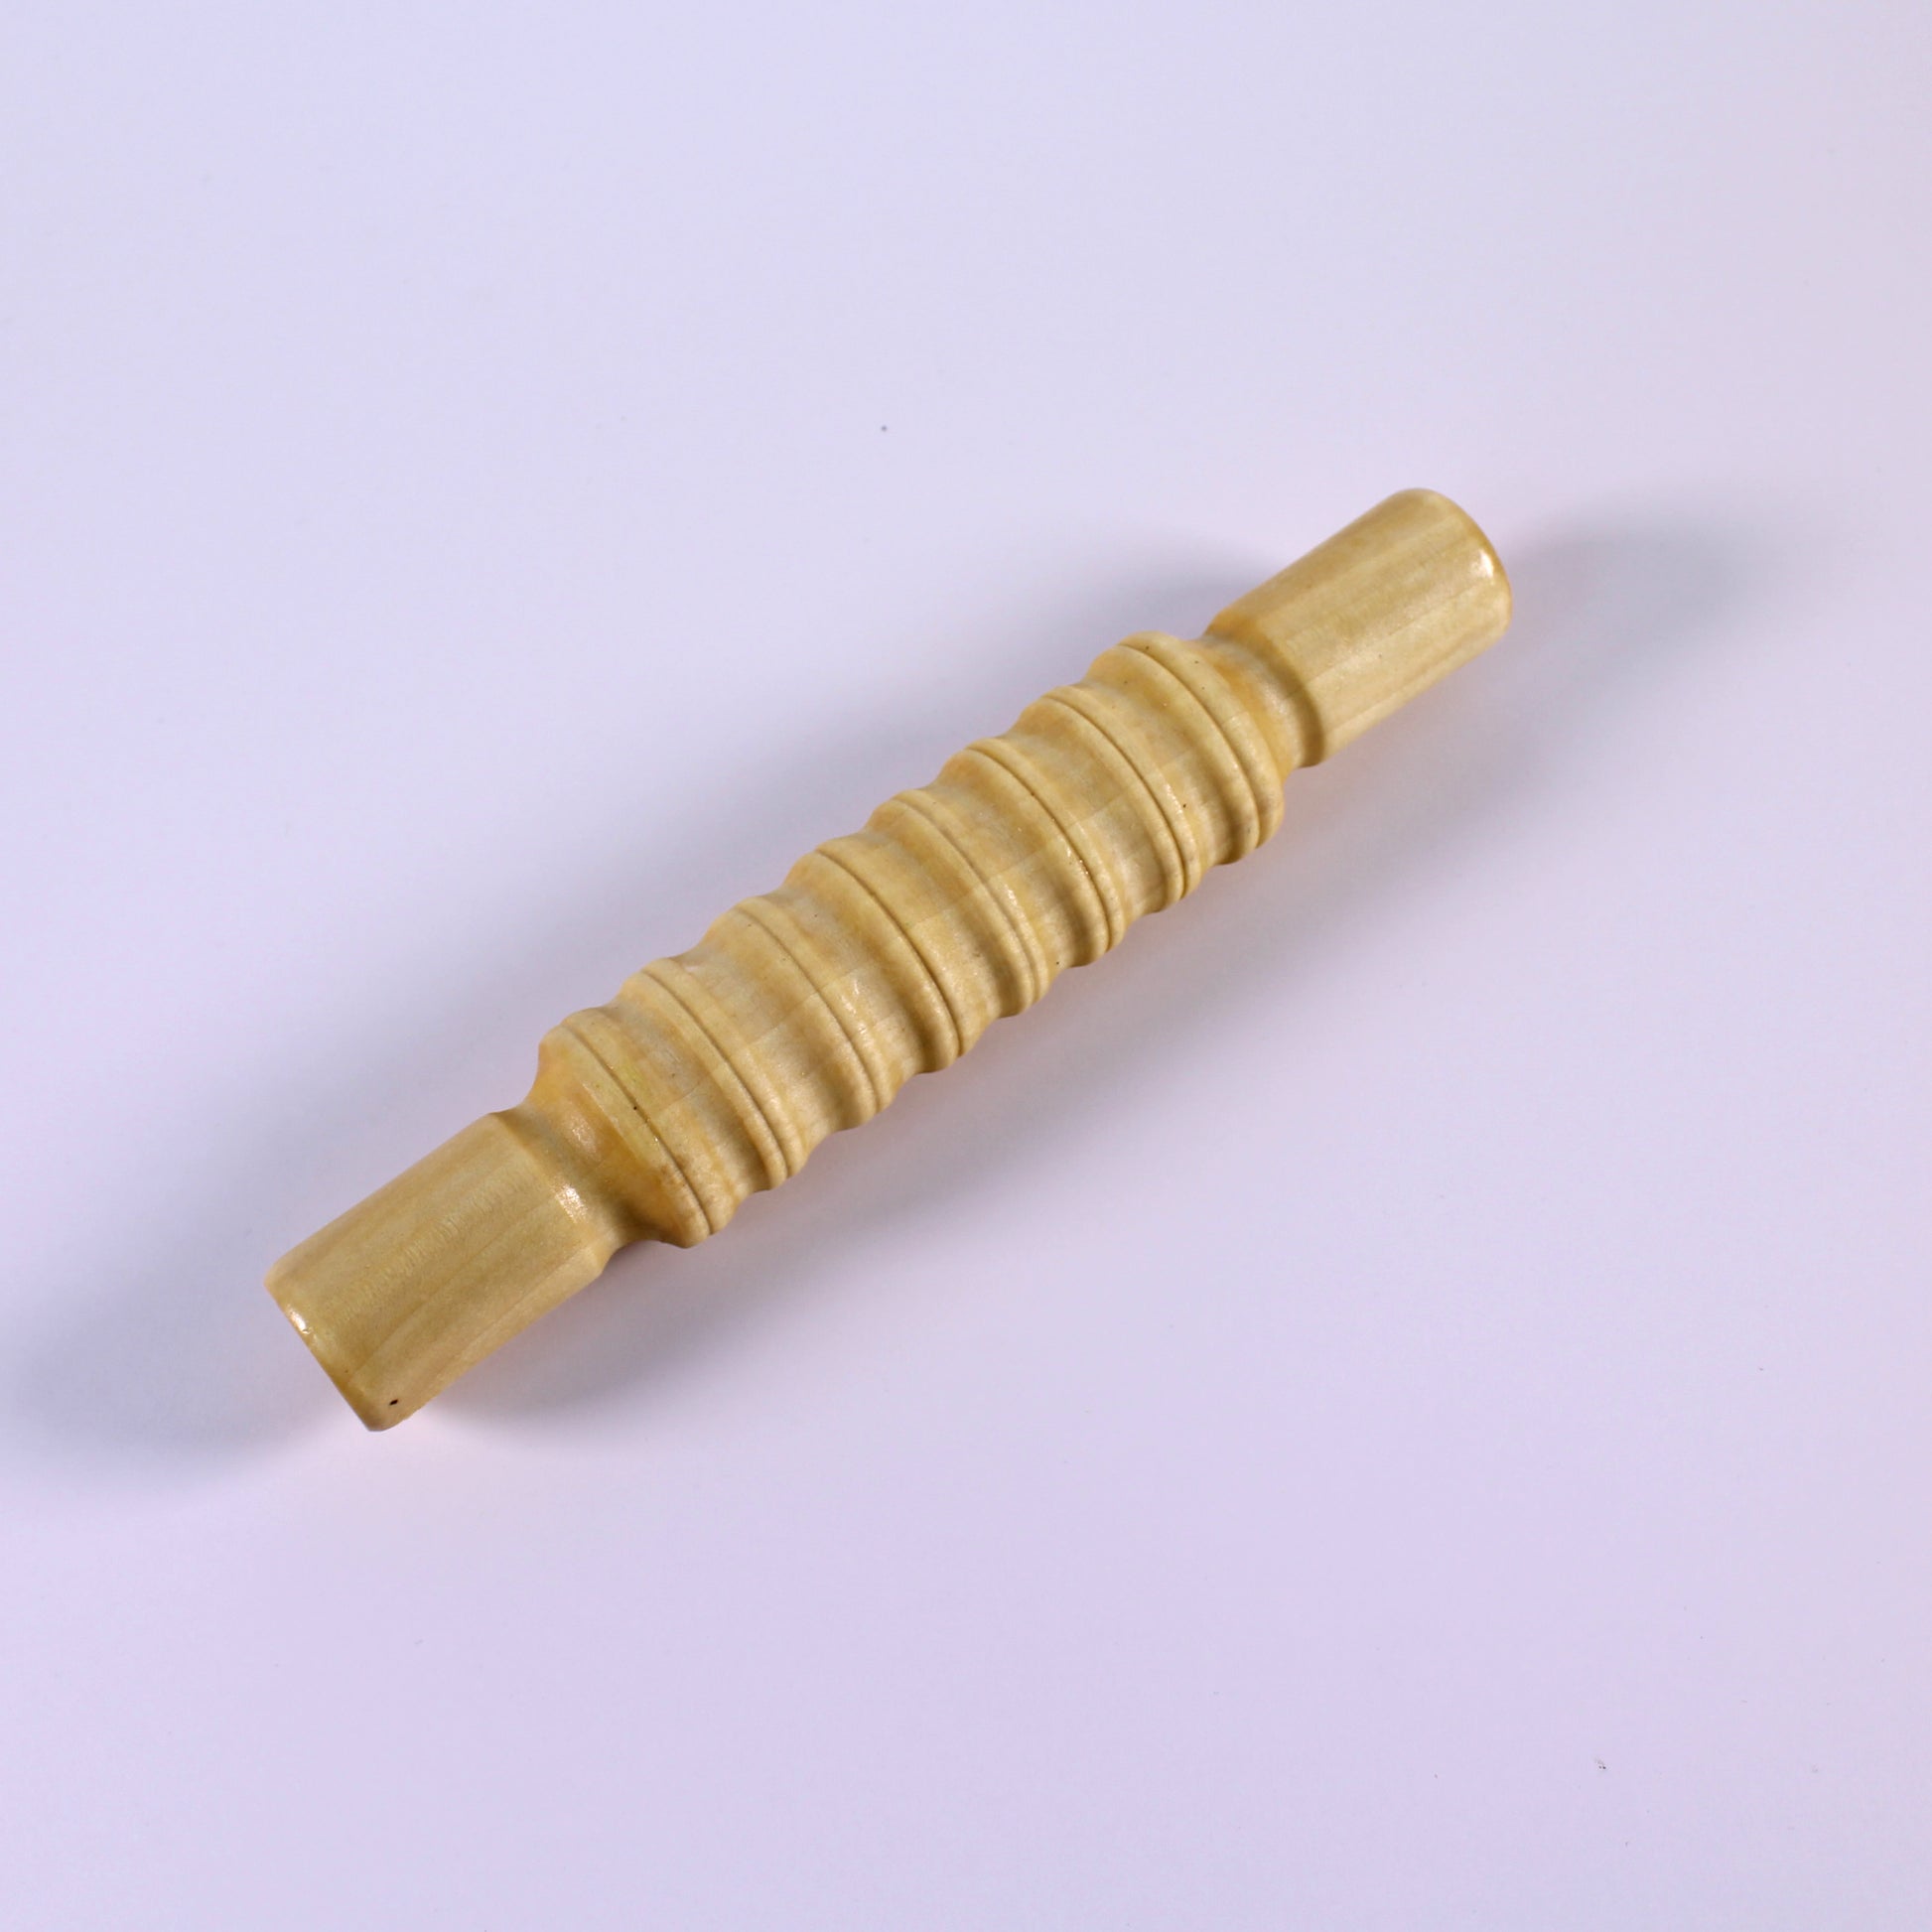 textured rolling pin